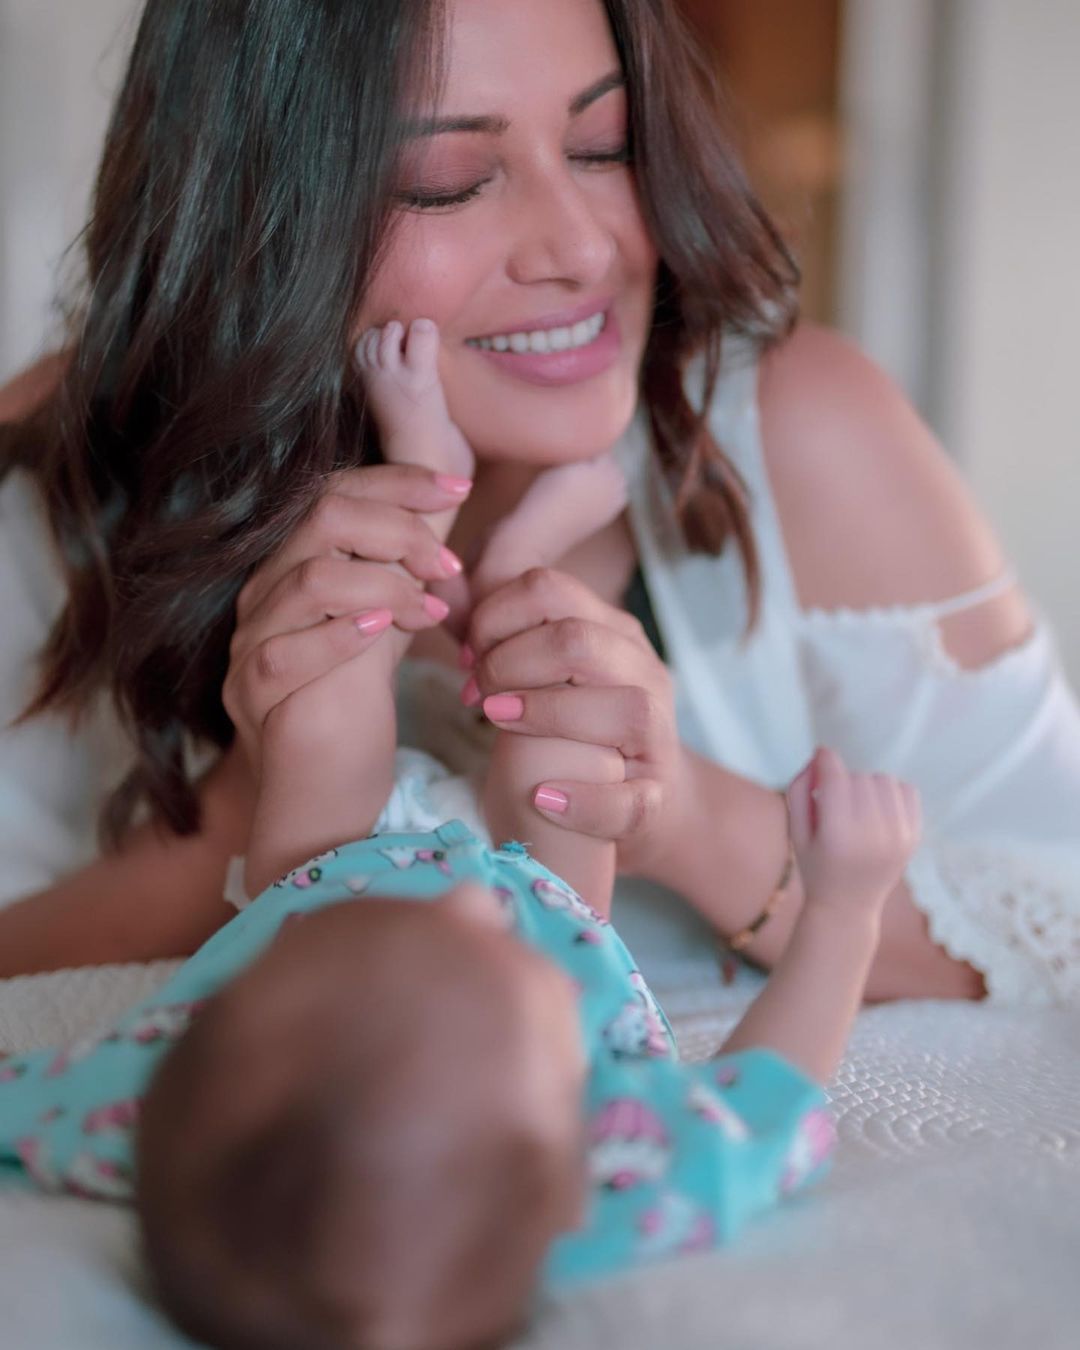 Bipasha Basu shared a heartwarming photo with daughter Devi. She captioned the photo: 'The most beautiful role of my life...'